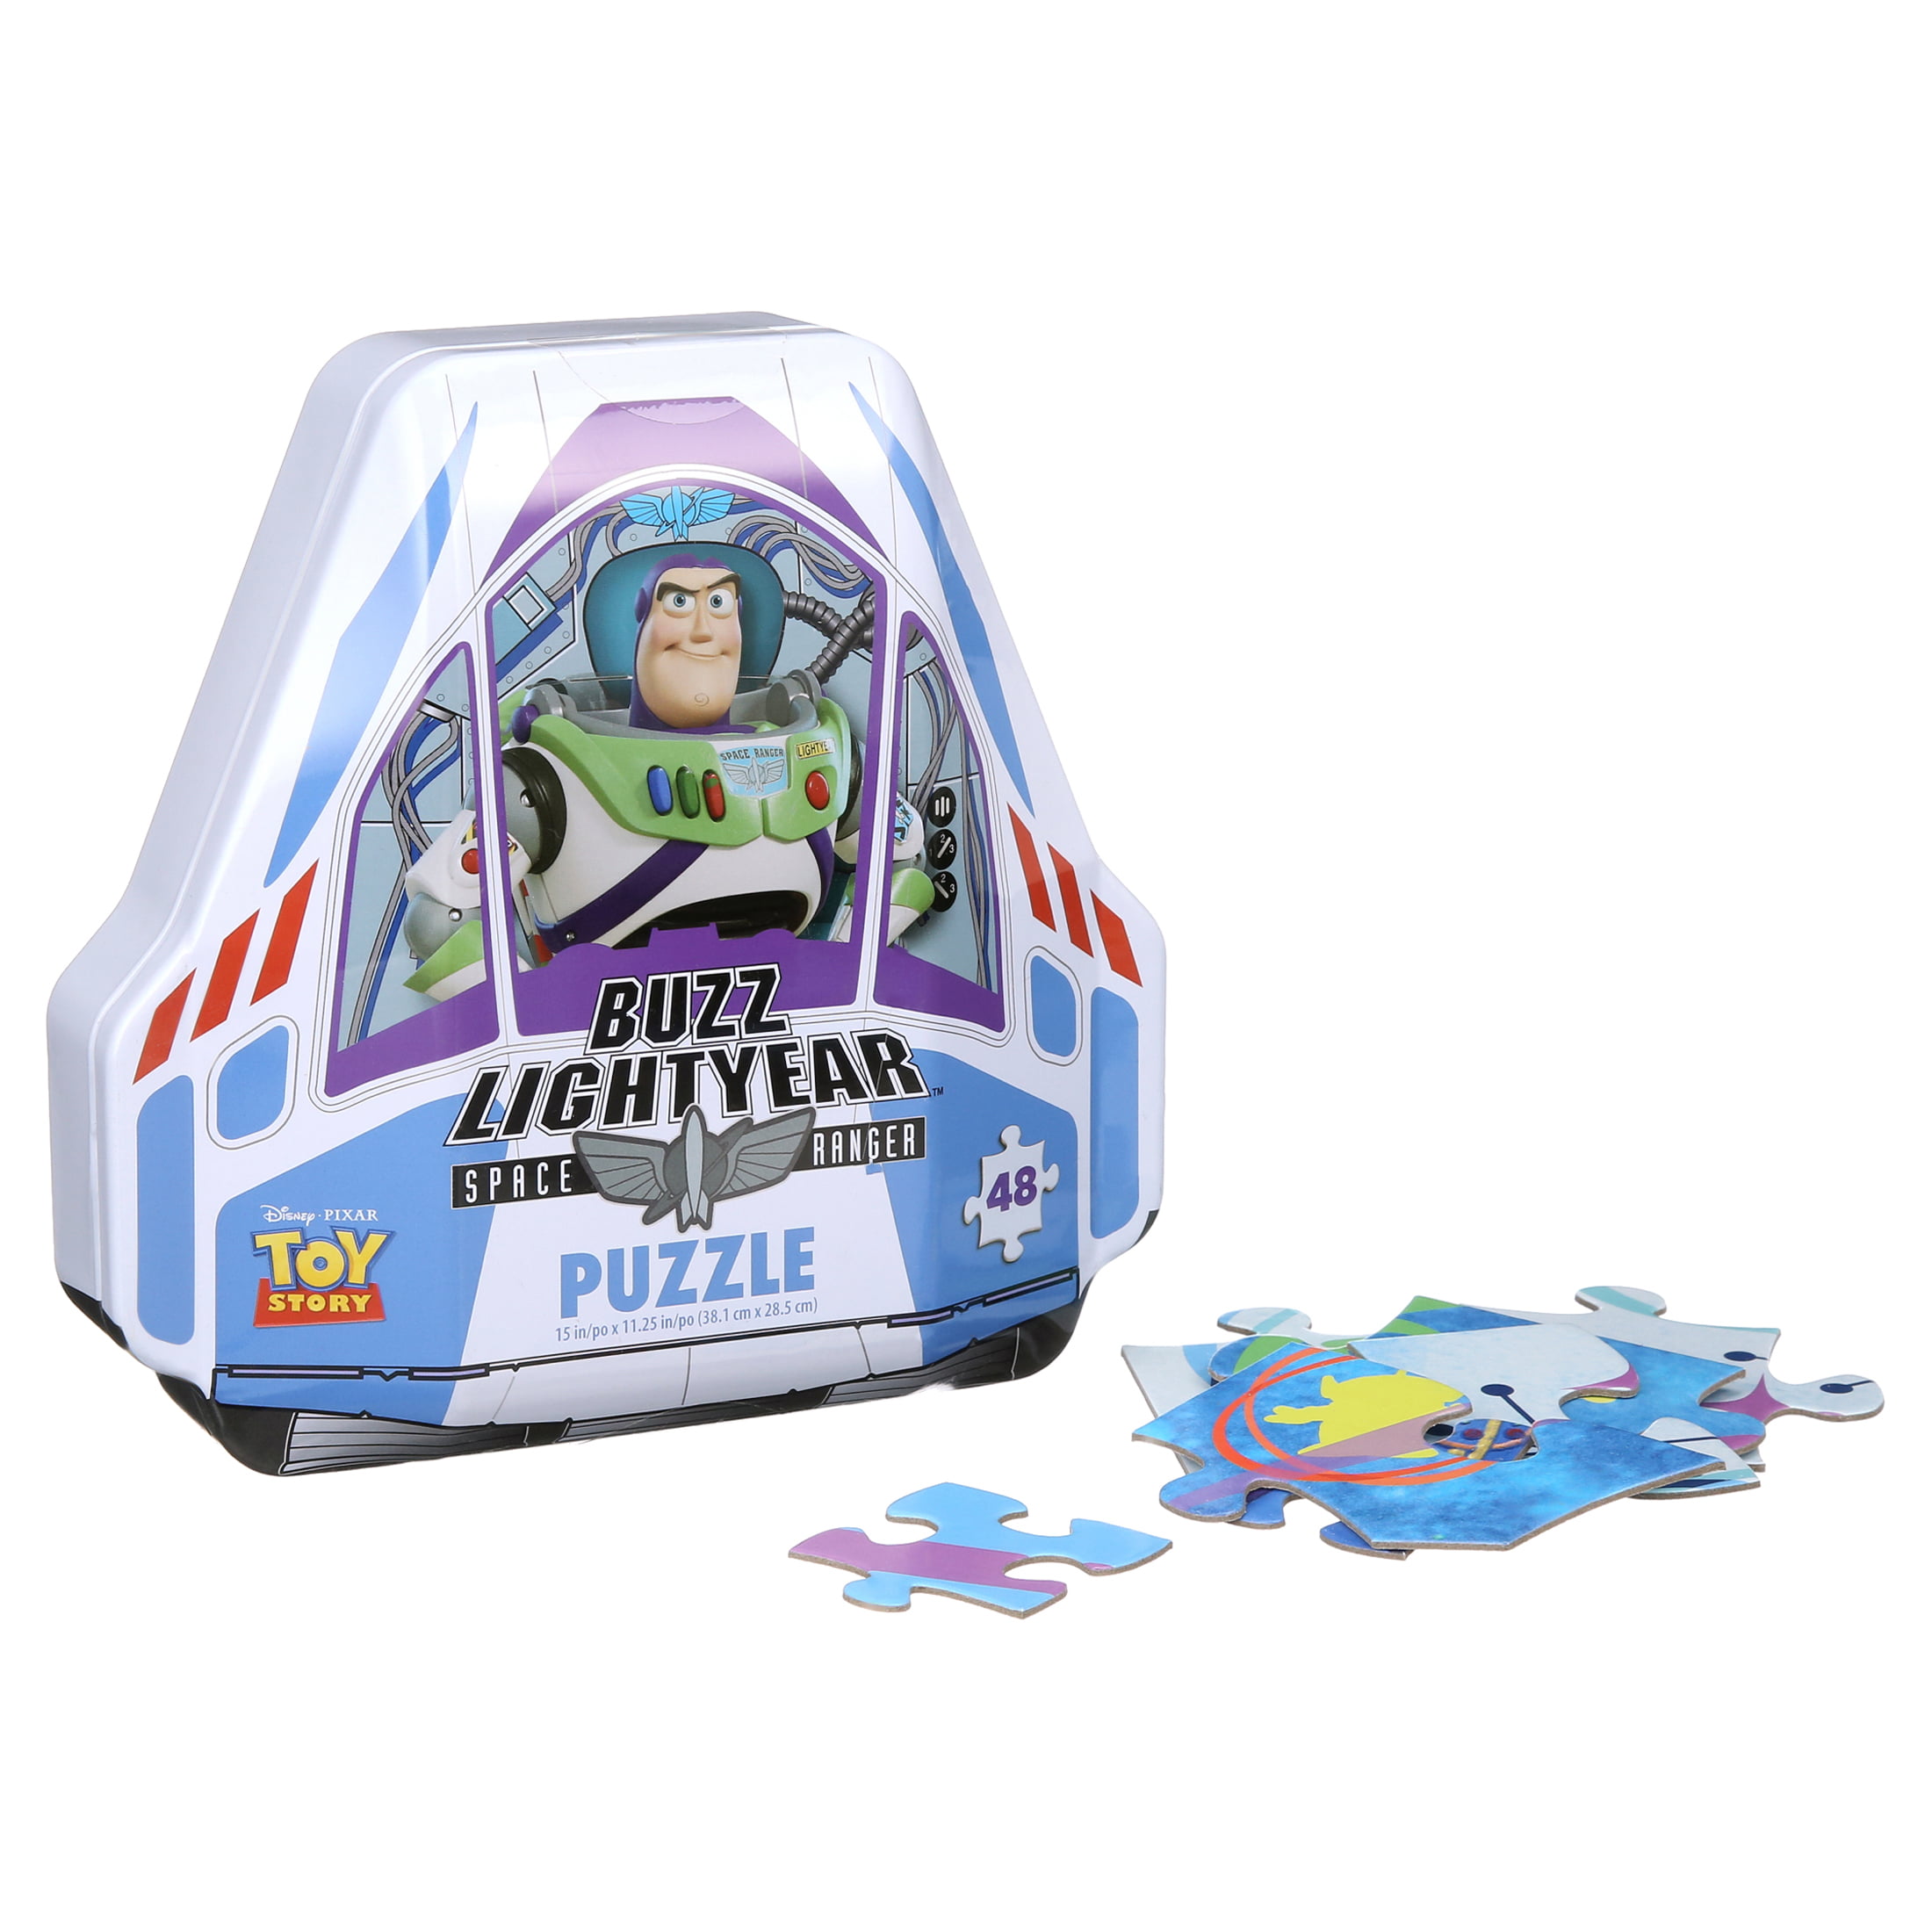 Disney Pixar Toy Story 4 Shaped Buzz Lightyear Tin with 48 Piece Surprise Puzzle 